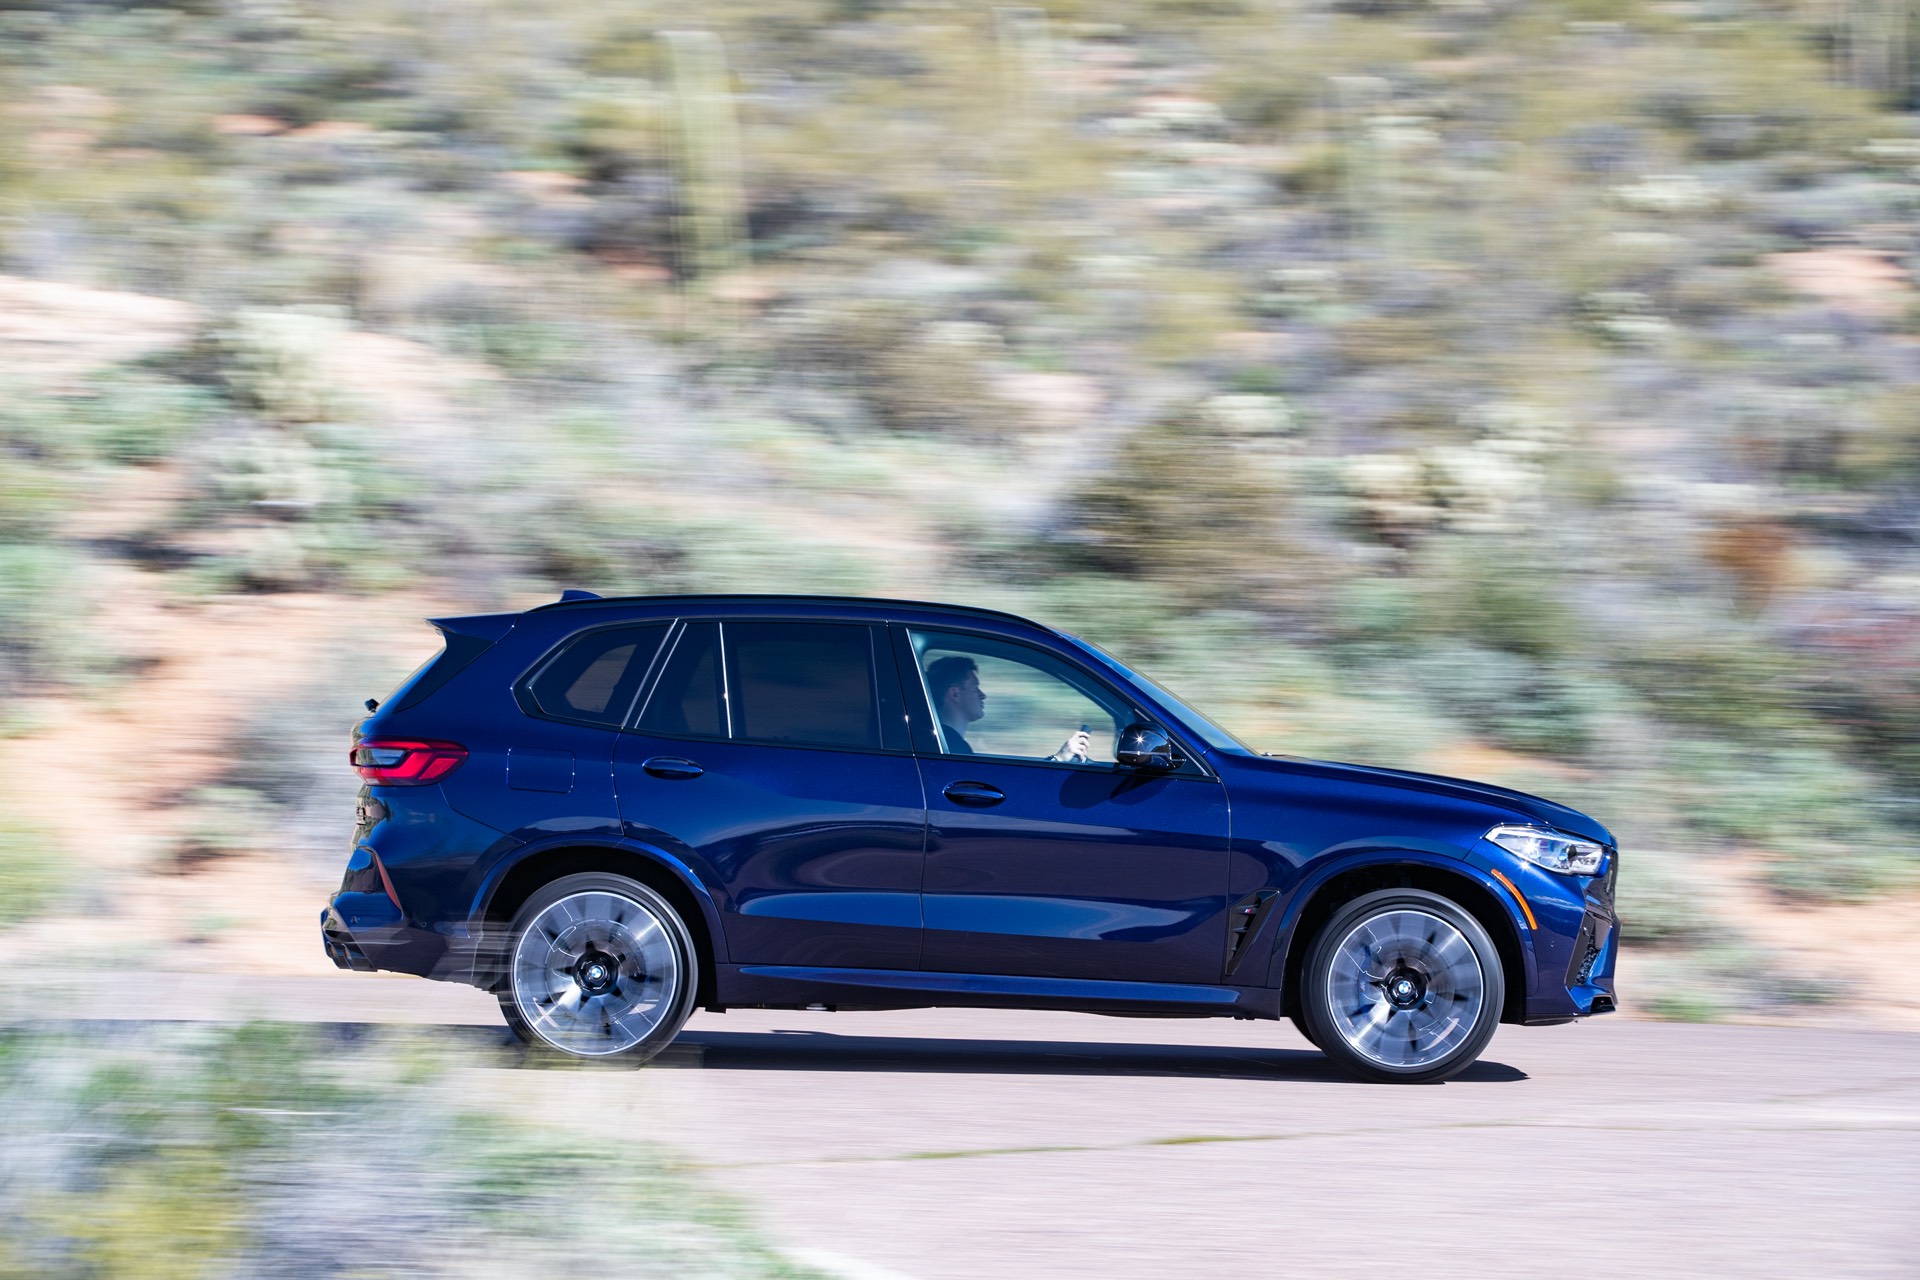 BMW X5 M Review